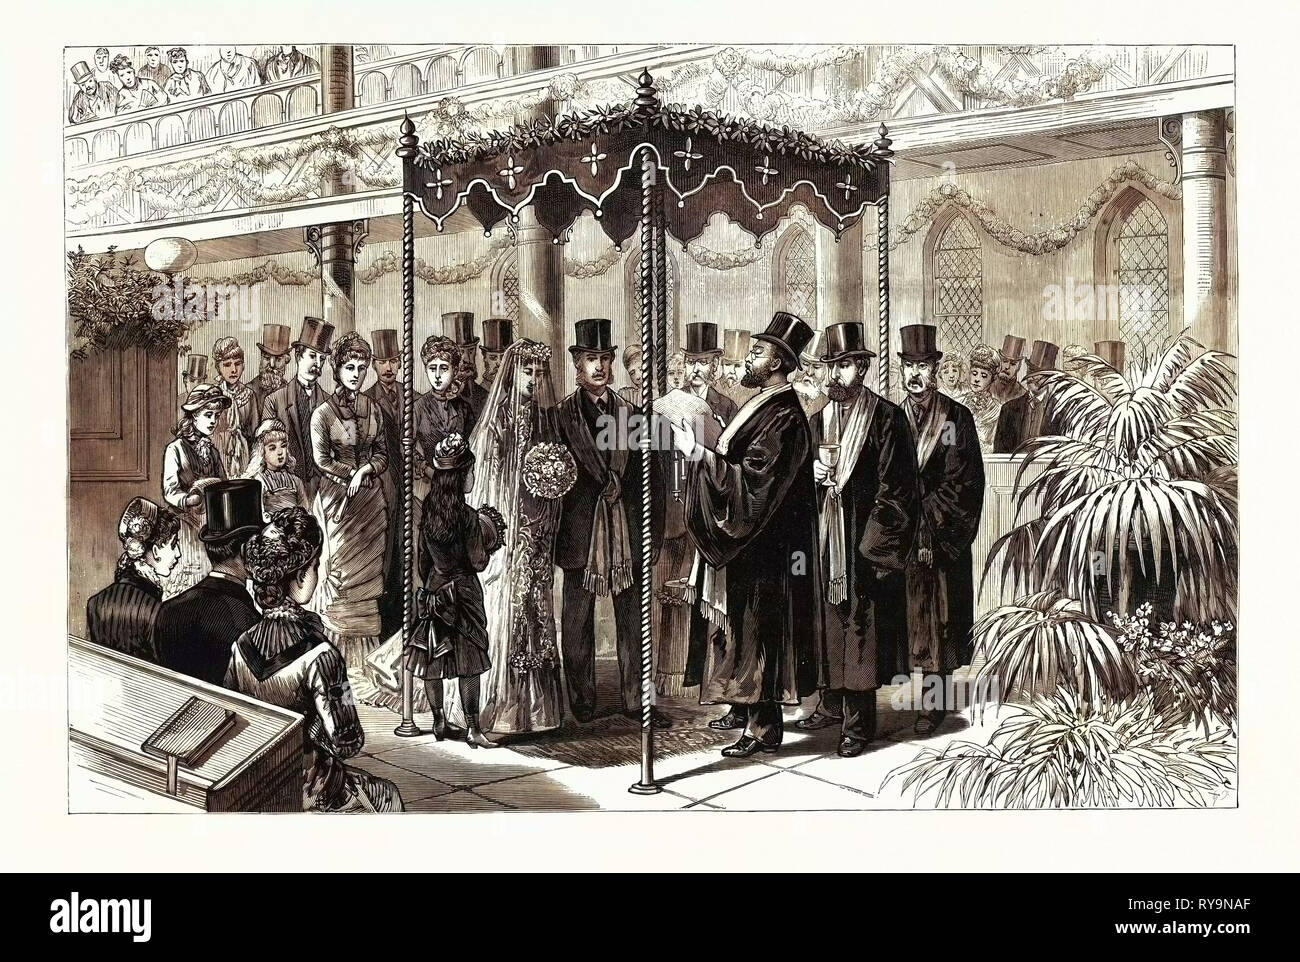 The Rothschild-Perugia Wedding in London, January 19th, the Hebrew Ceremony Beneath the Canopy, UK, Engraving 1880 1881 Stock Photo